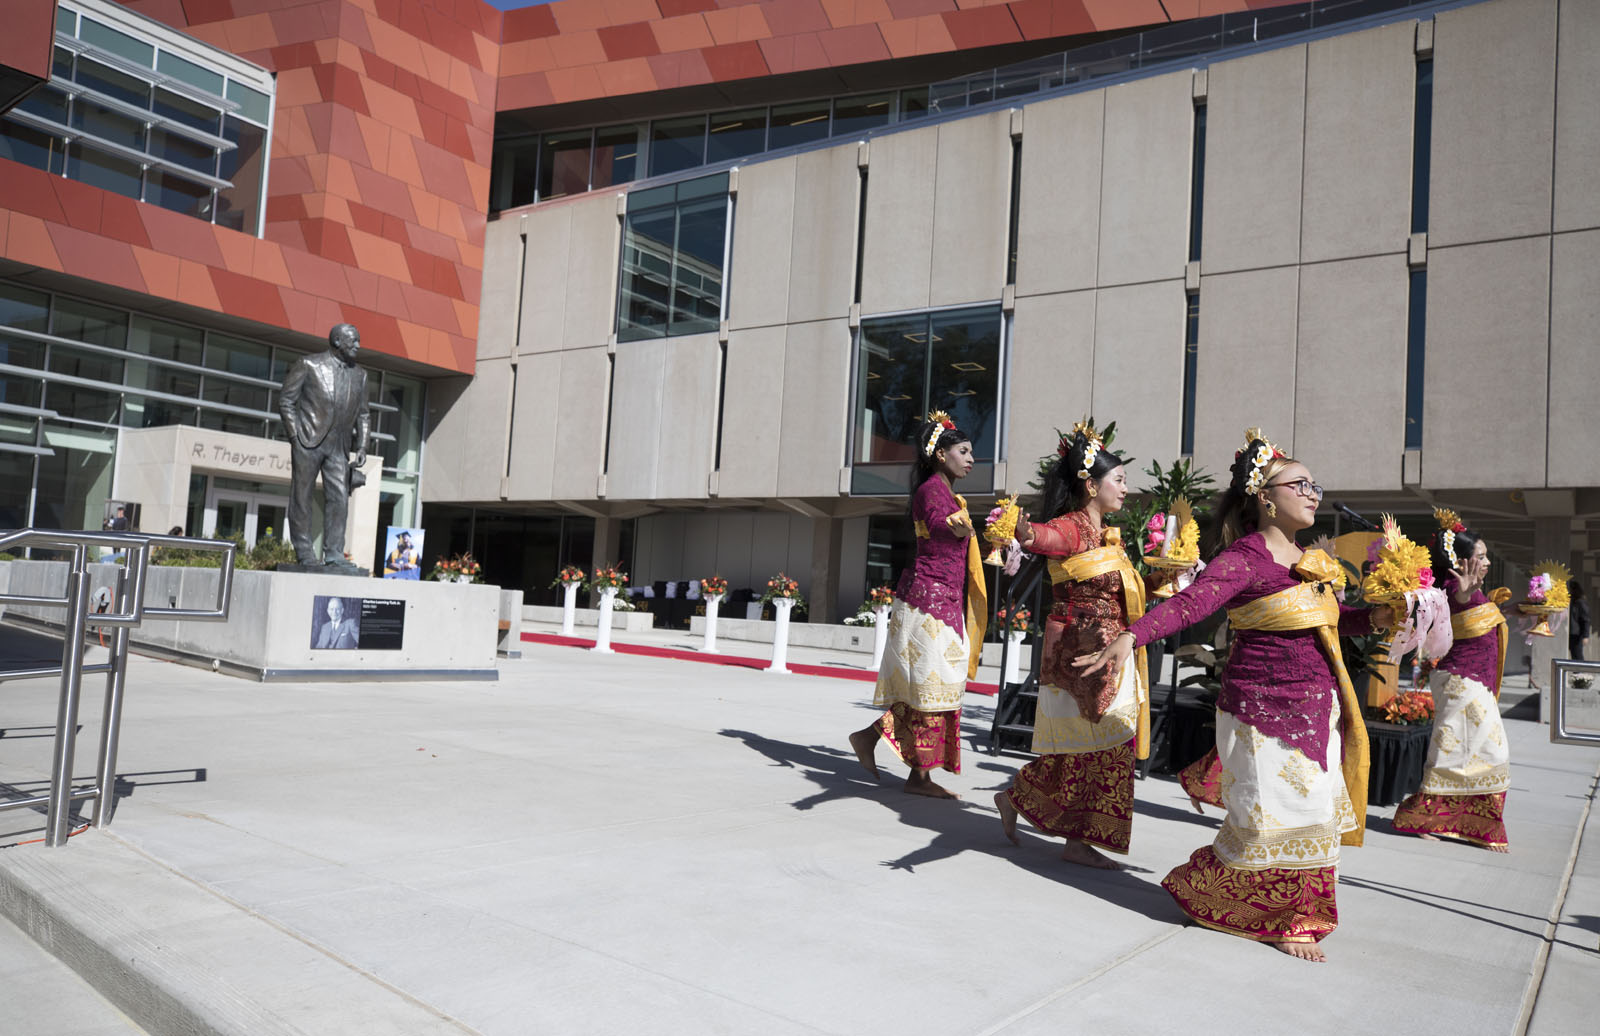 Members of Gamelan performed a dance while classes paraded in and took a seat for the Tutt Library Ribbon Cutting ceremony.